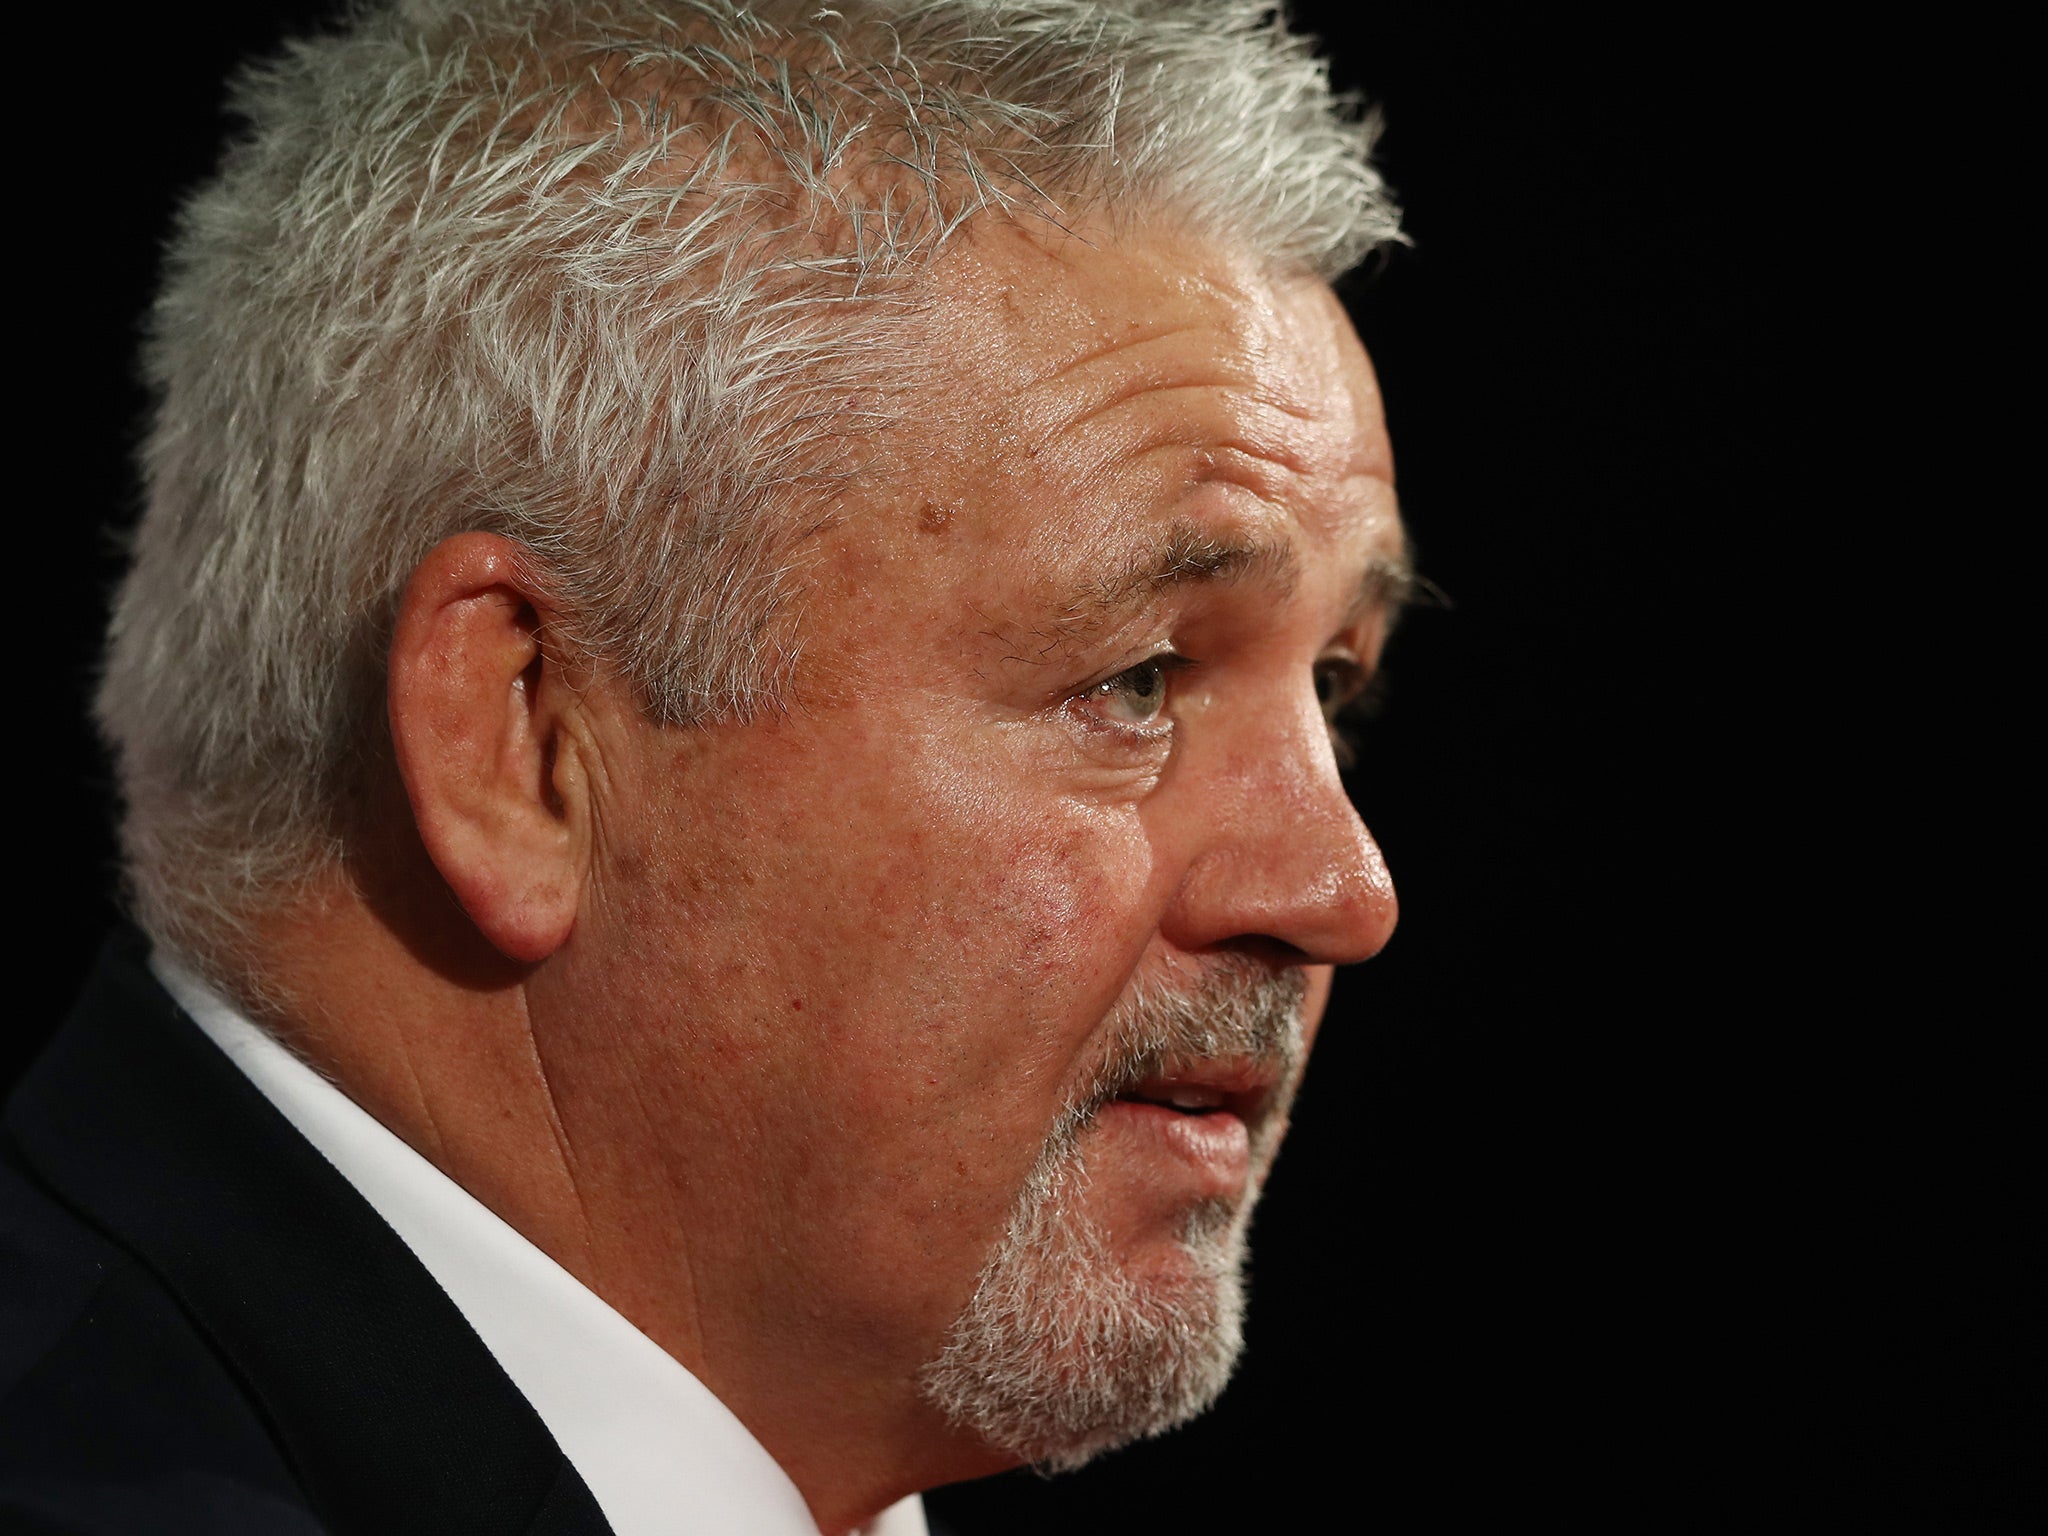 Warren Gatland sees no reason why the Lions cannot repeat their 2013 triumph